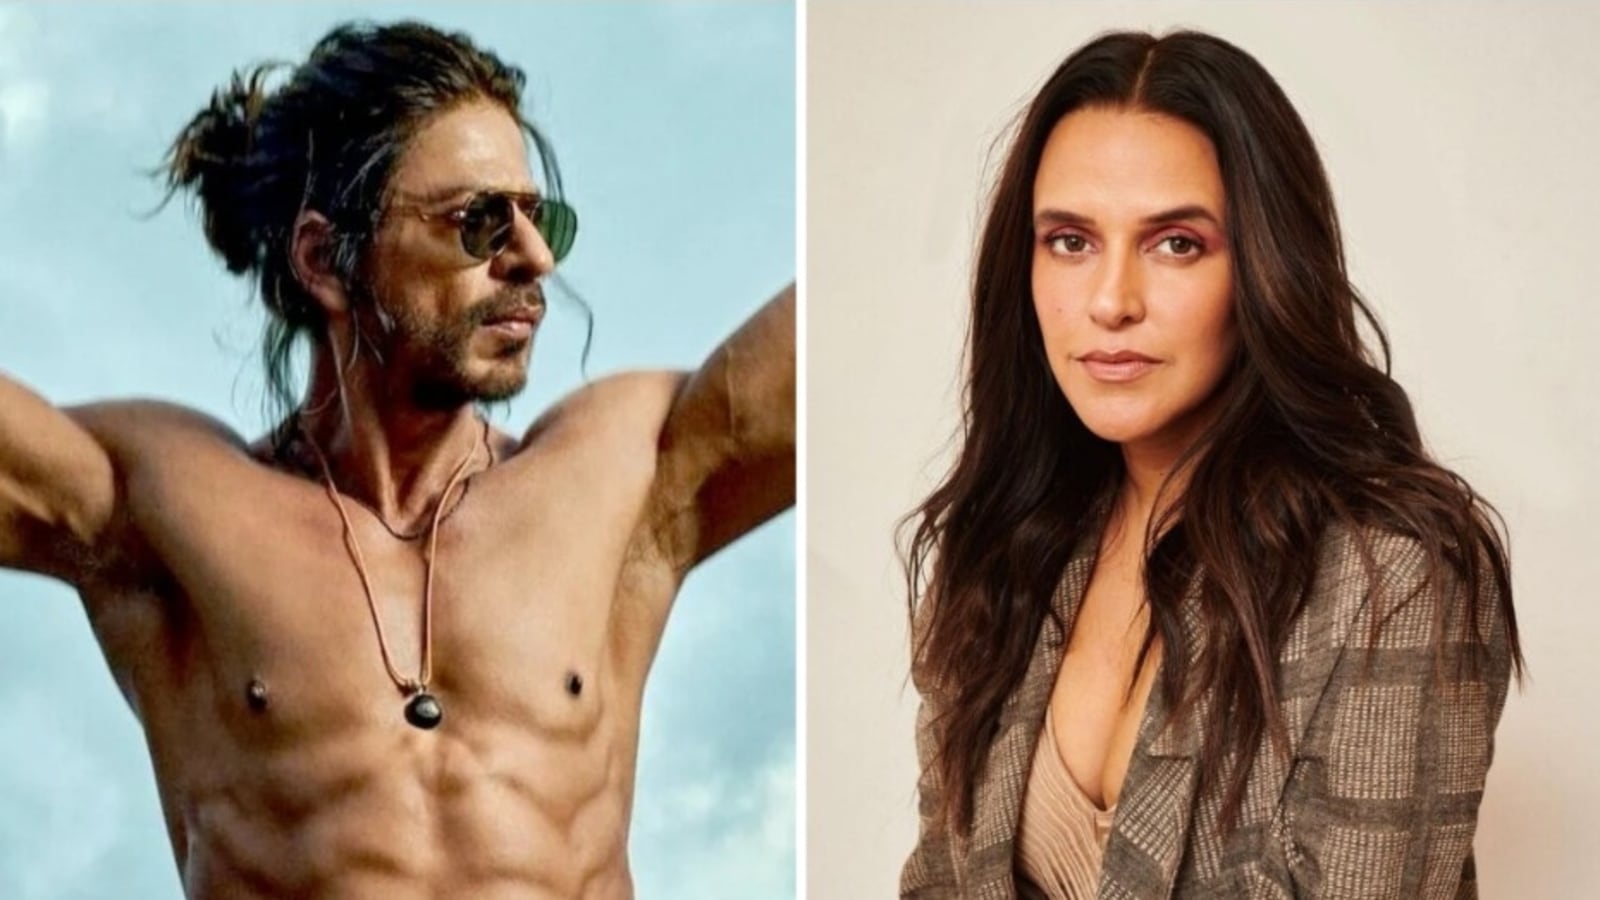 ‘Either sex sells or Shah Rukh Khan’: Neha Dhupia says even after 20 years her statement rings true amid Pathaan buzz